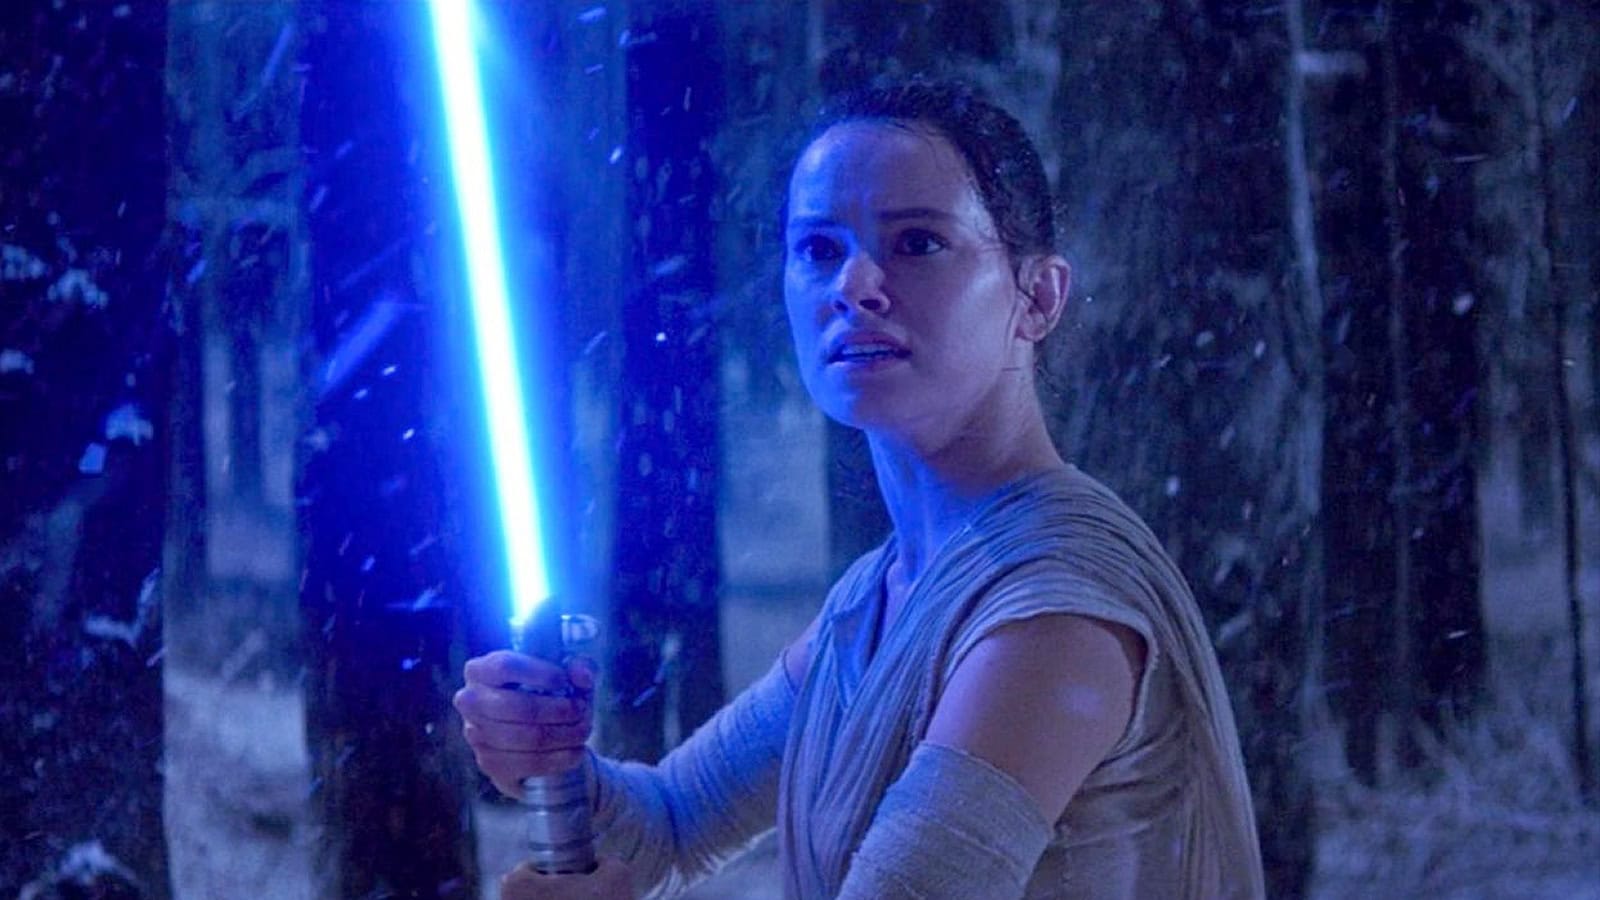 Daisy Ridley Opens Up About Limiting Her Star Wars Return to One Film